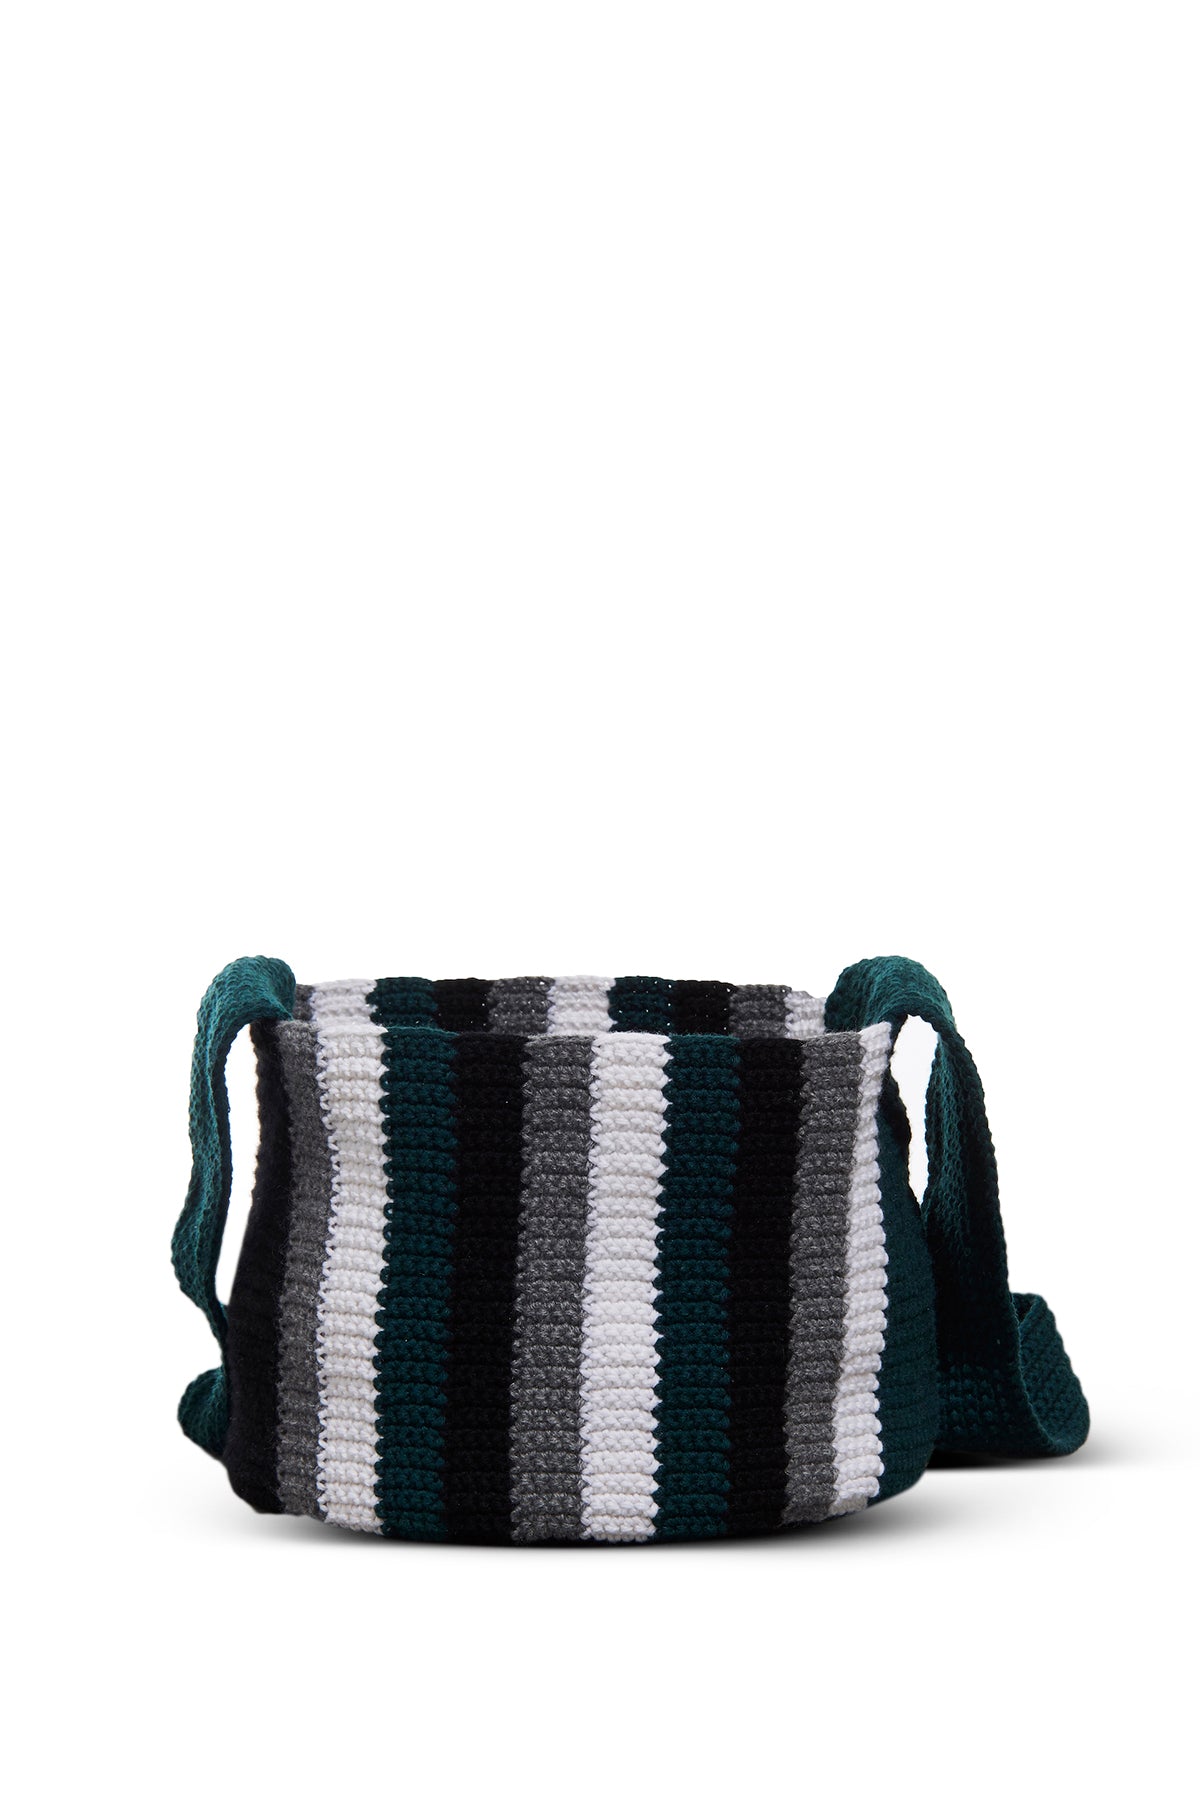 Crossover Knit Bag in Green, Ivory & Grey Cashmere